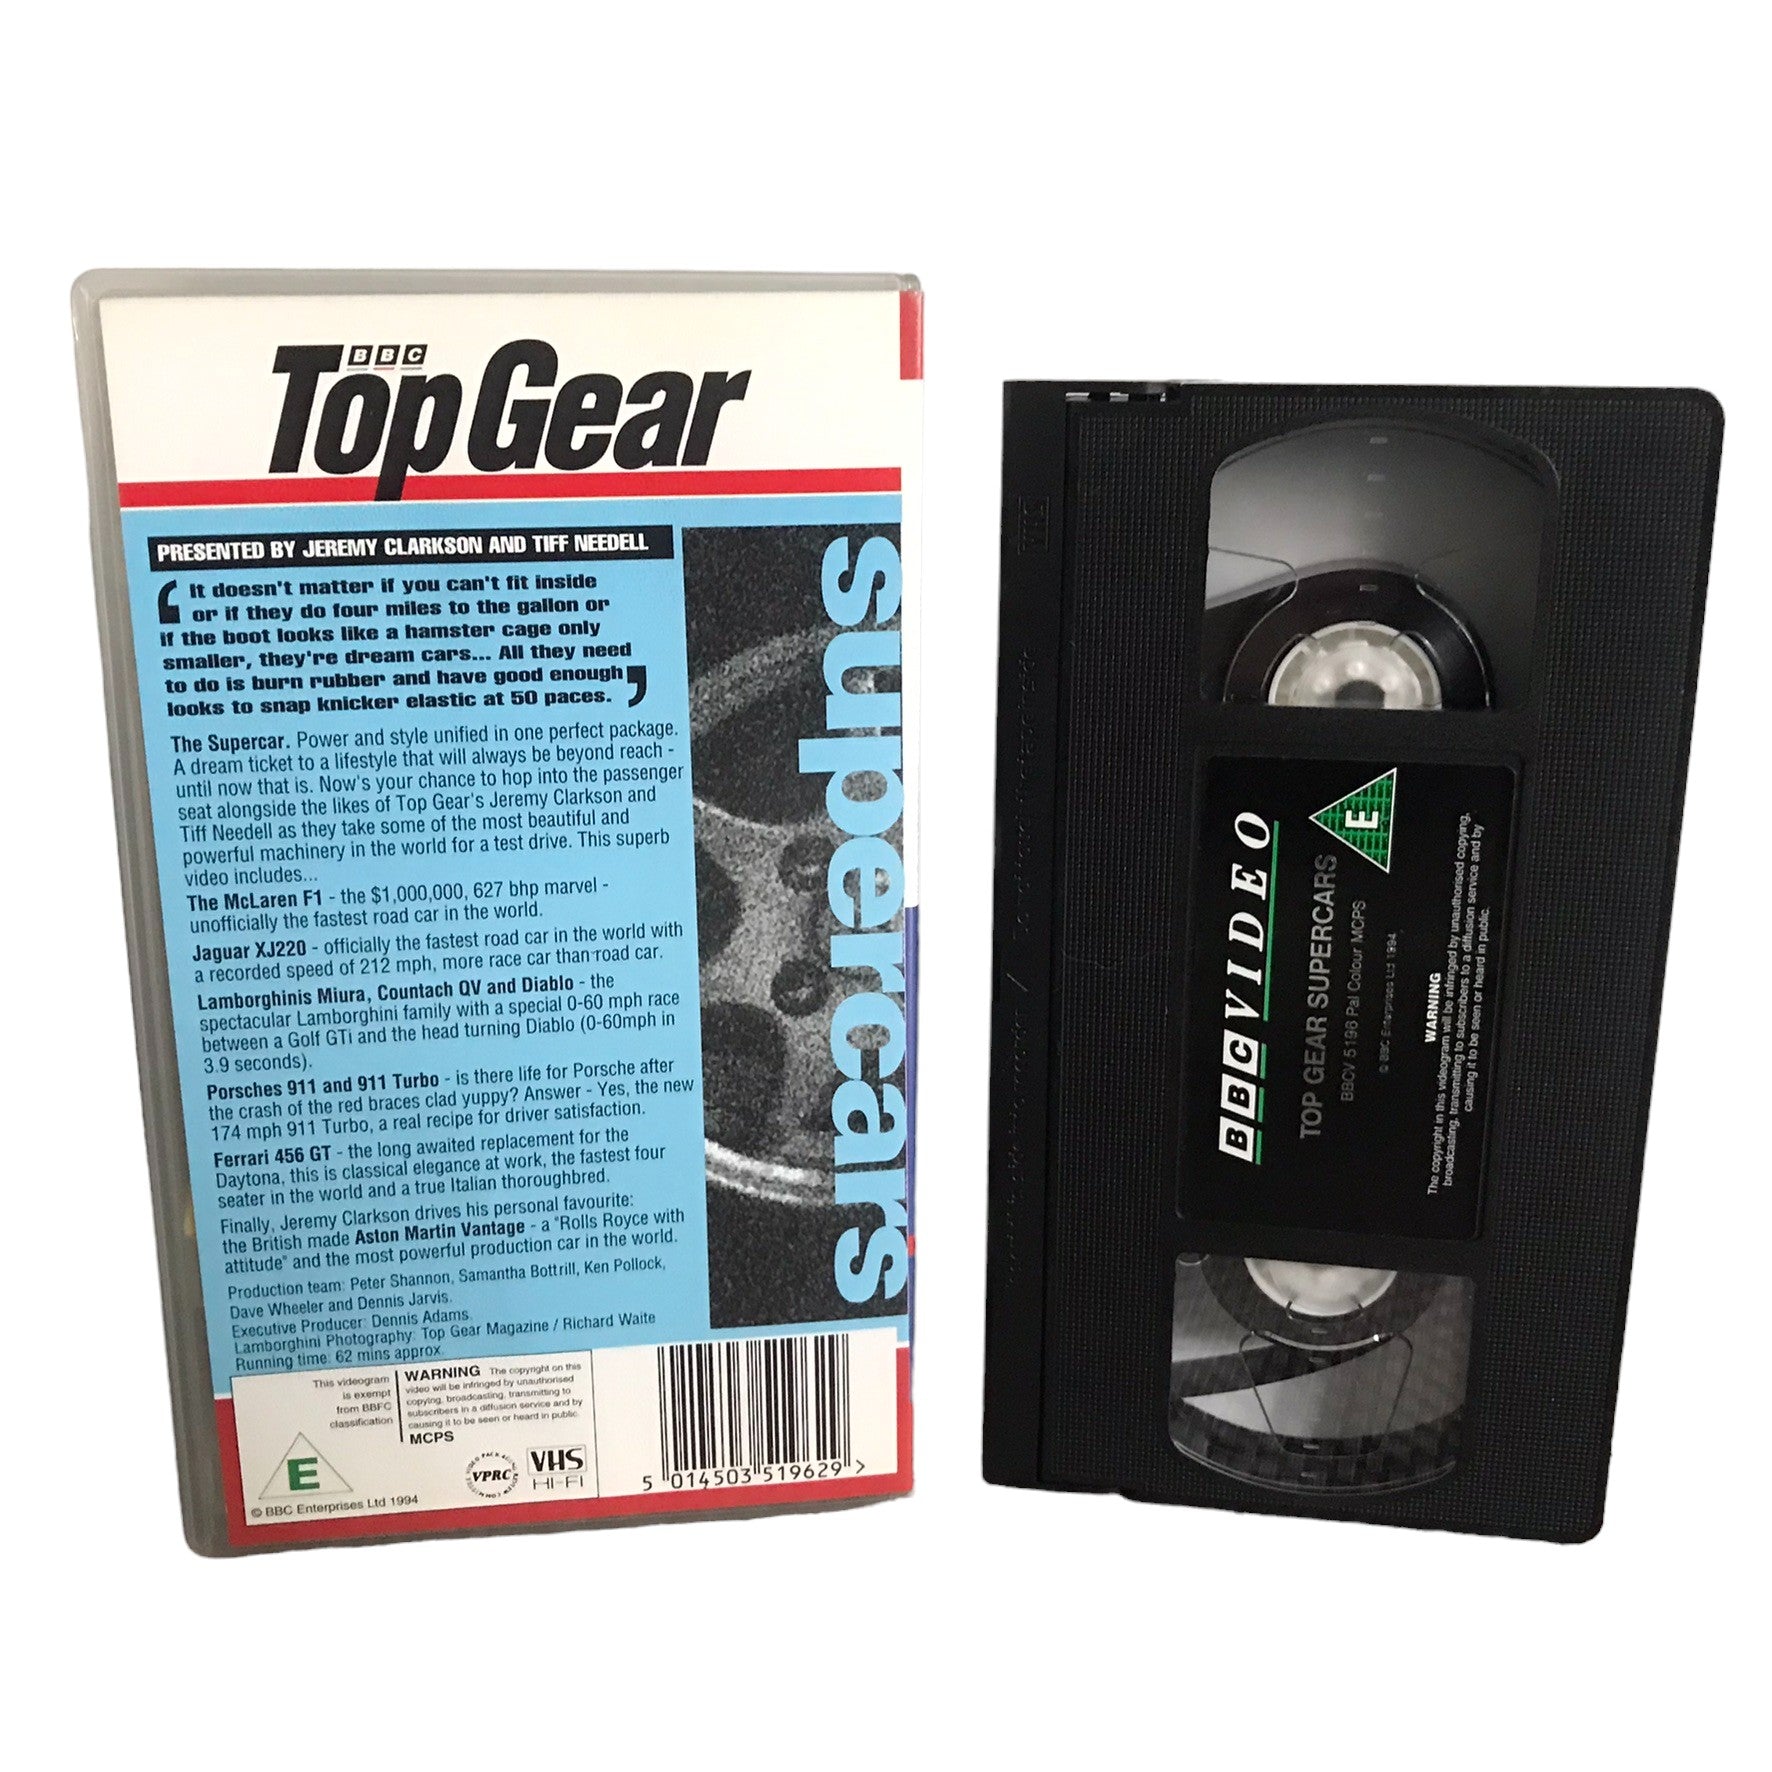 Top Gear - With Jeremy Clarkson and Tiff Needell - BBC Enterprises - Sports - Pal - VHS-